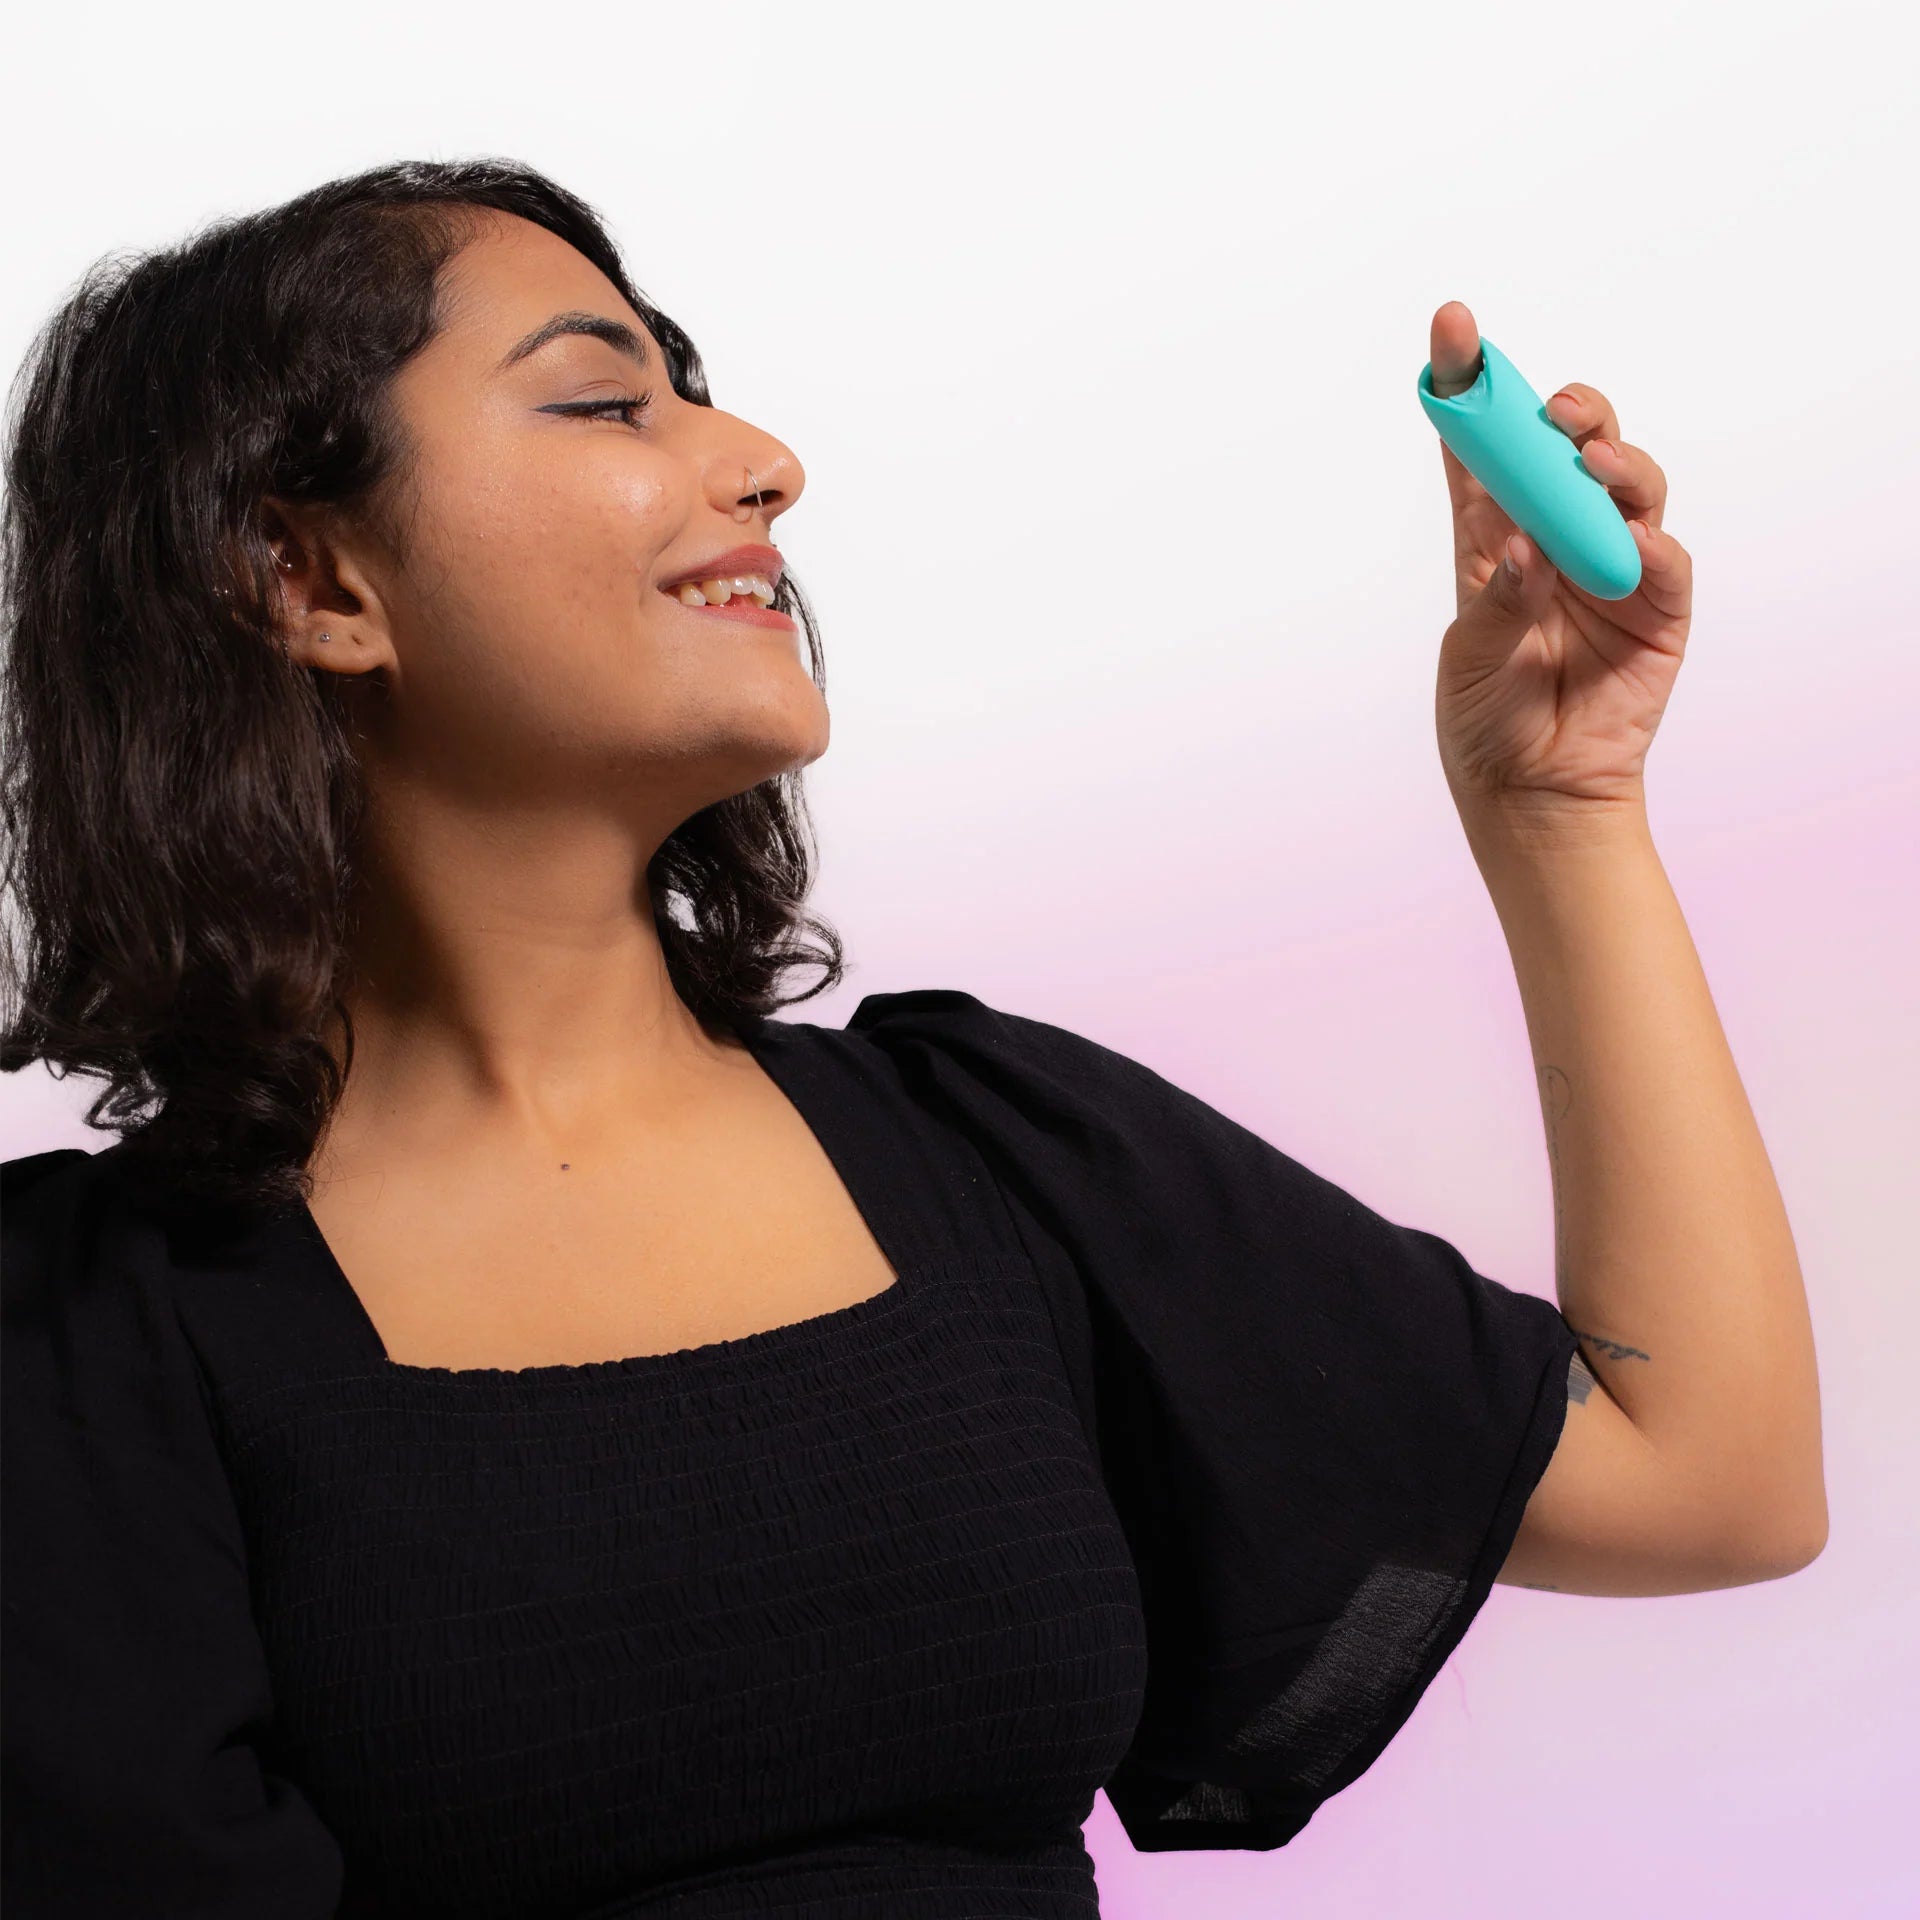 Women Examining Bubbly Blue Candy Personal Massager